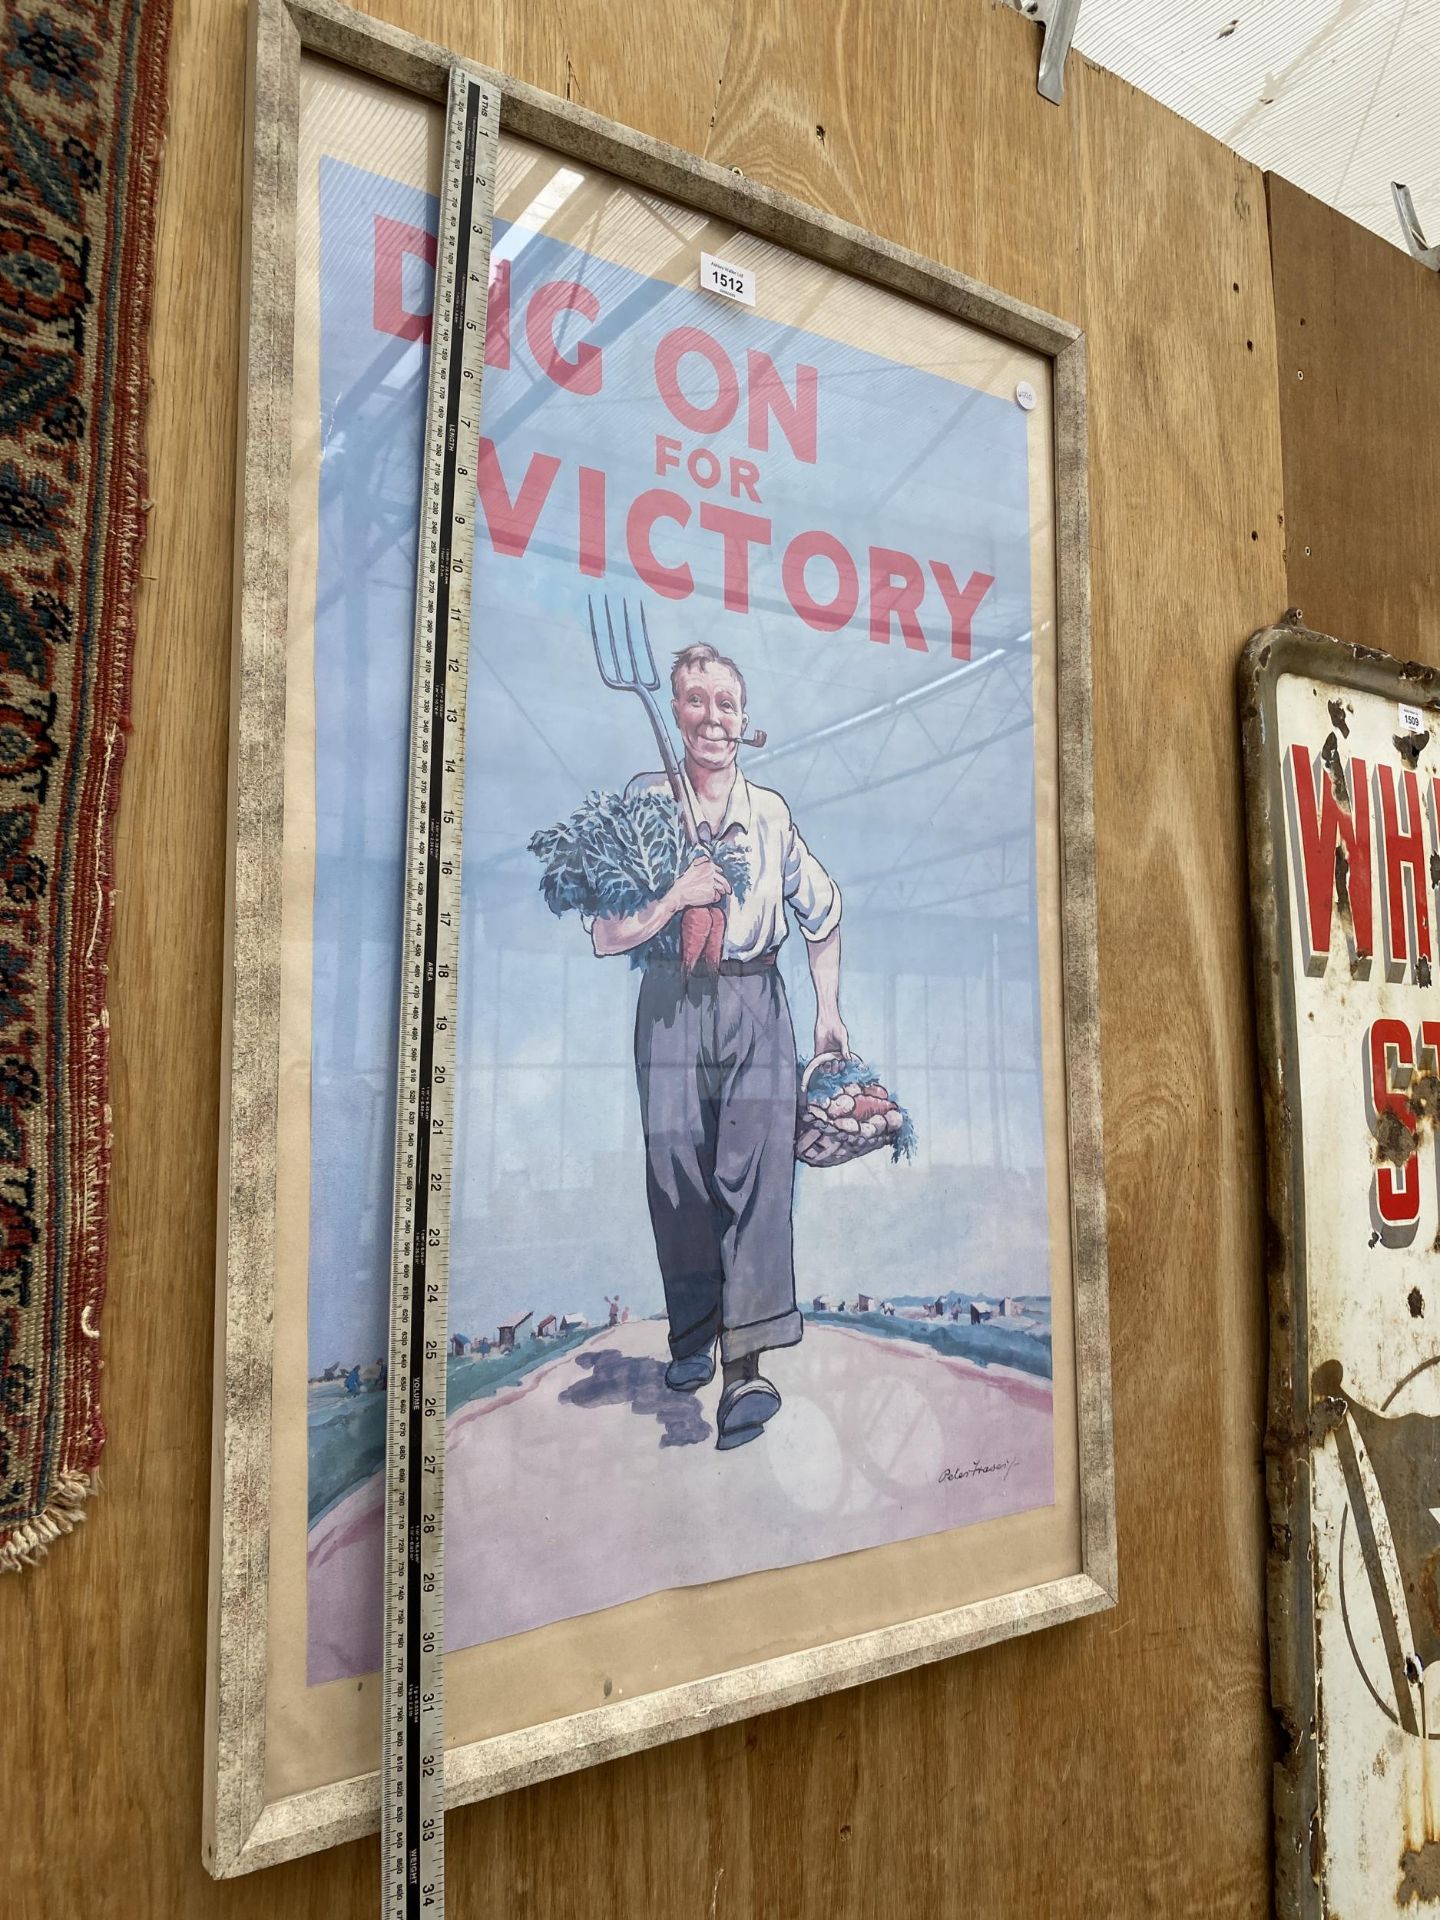 A FRAMED 'DIG ON FOR VICTORY' PRINT - Image 5 of 5